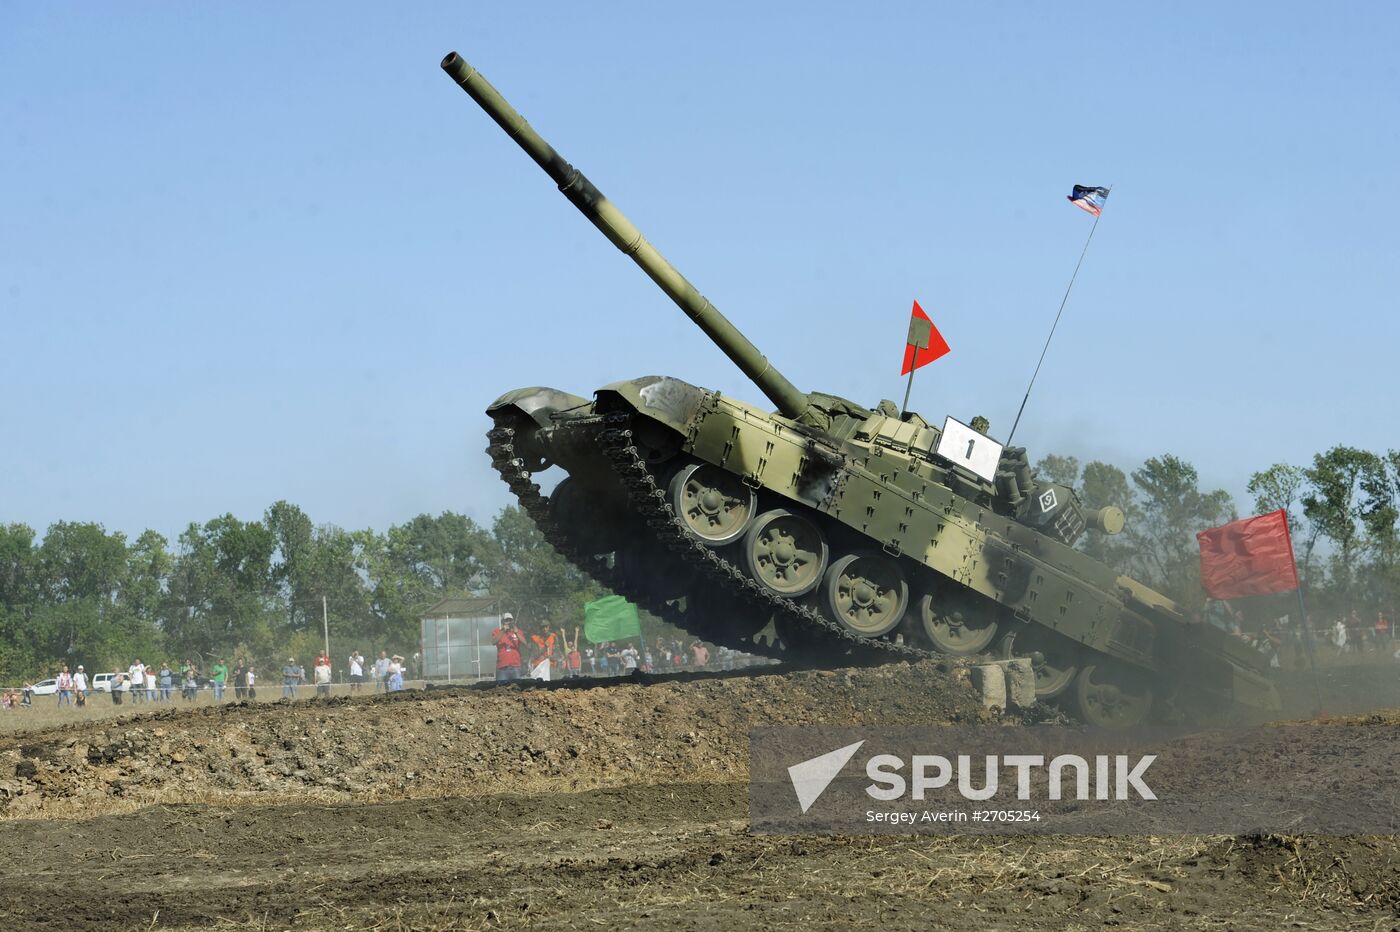 Opening of competitions of DPR tank units